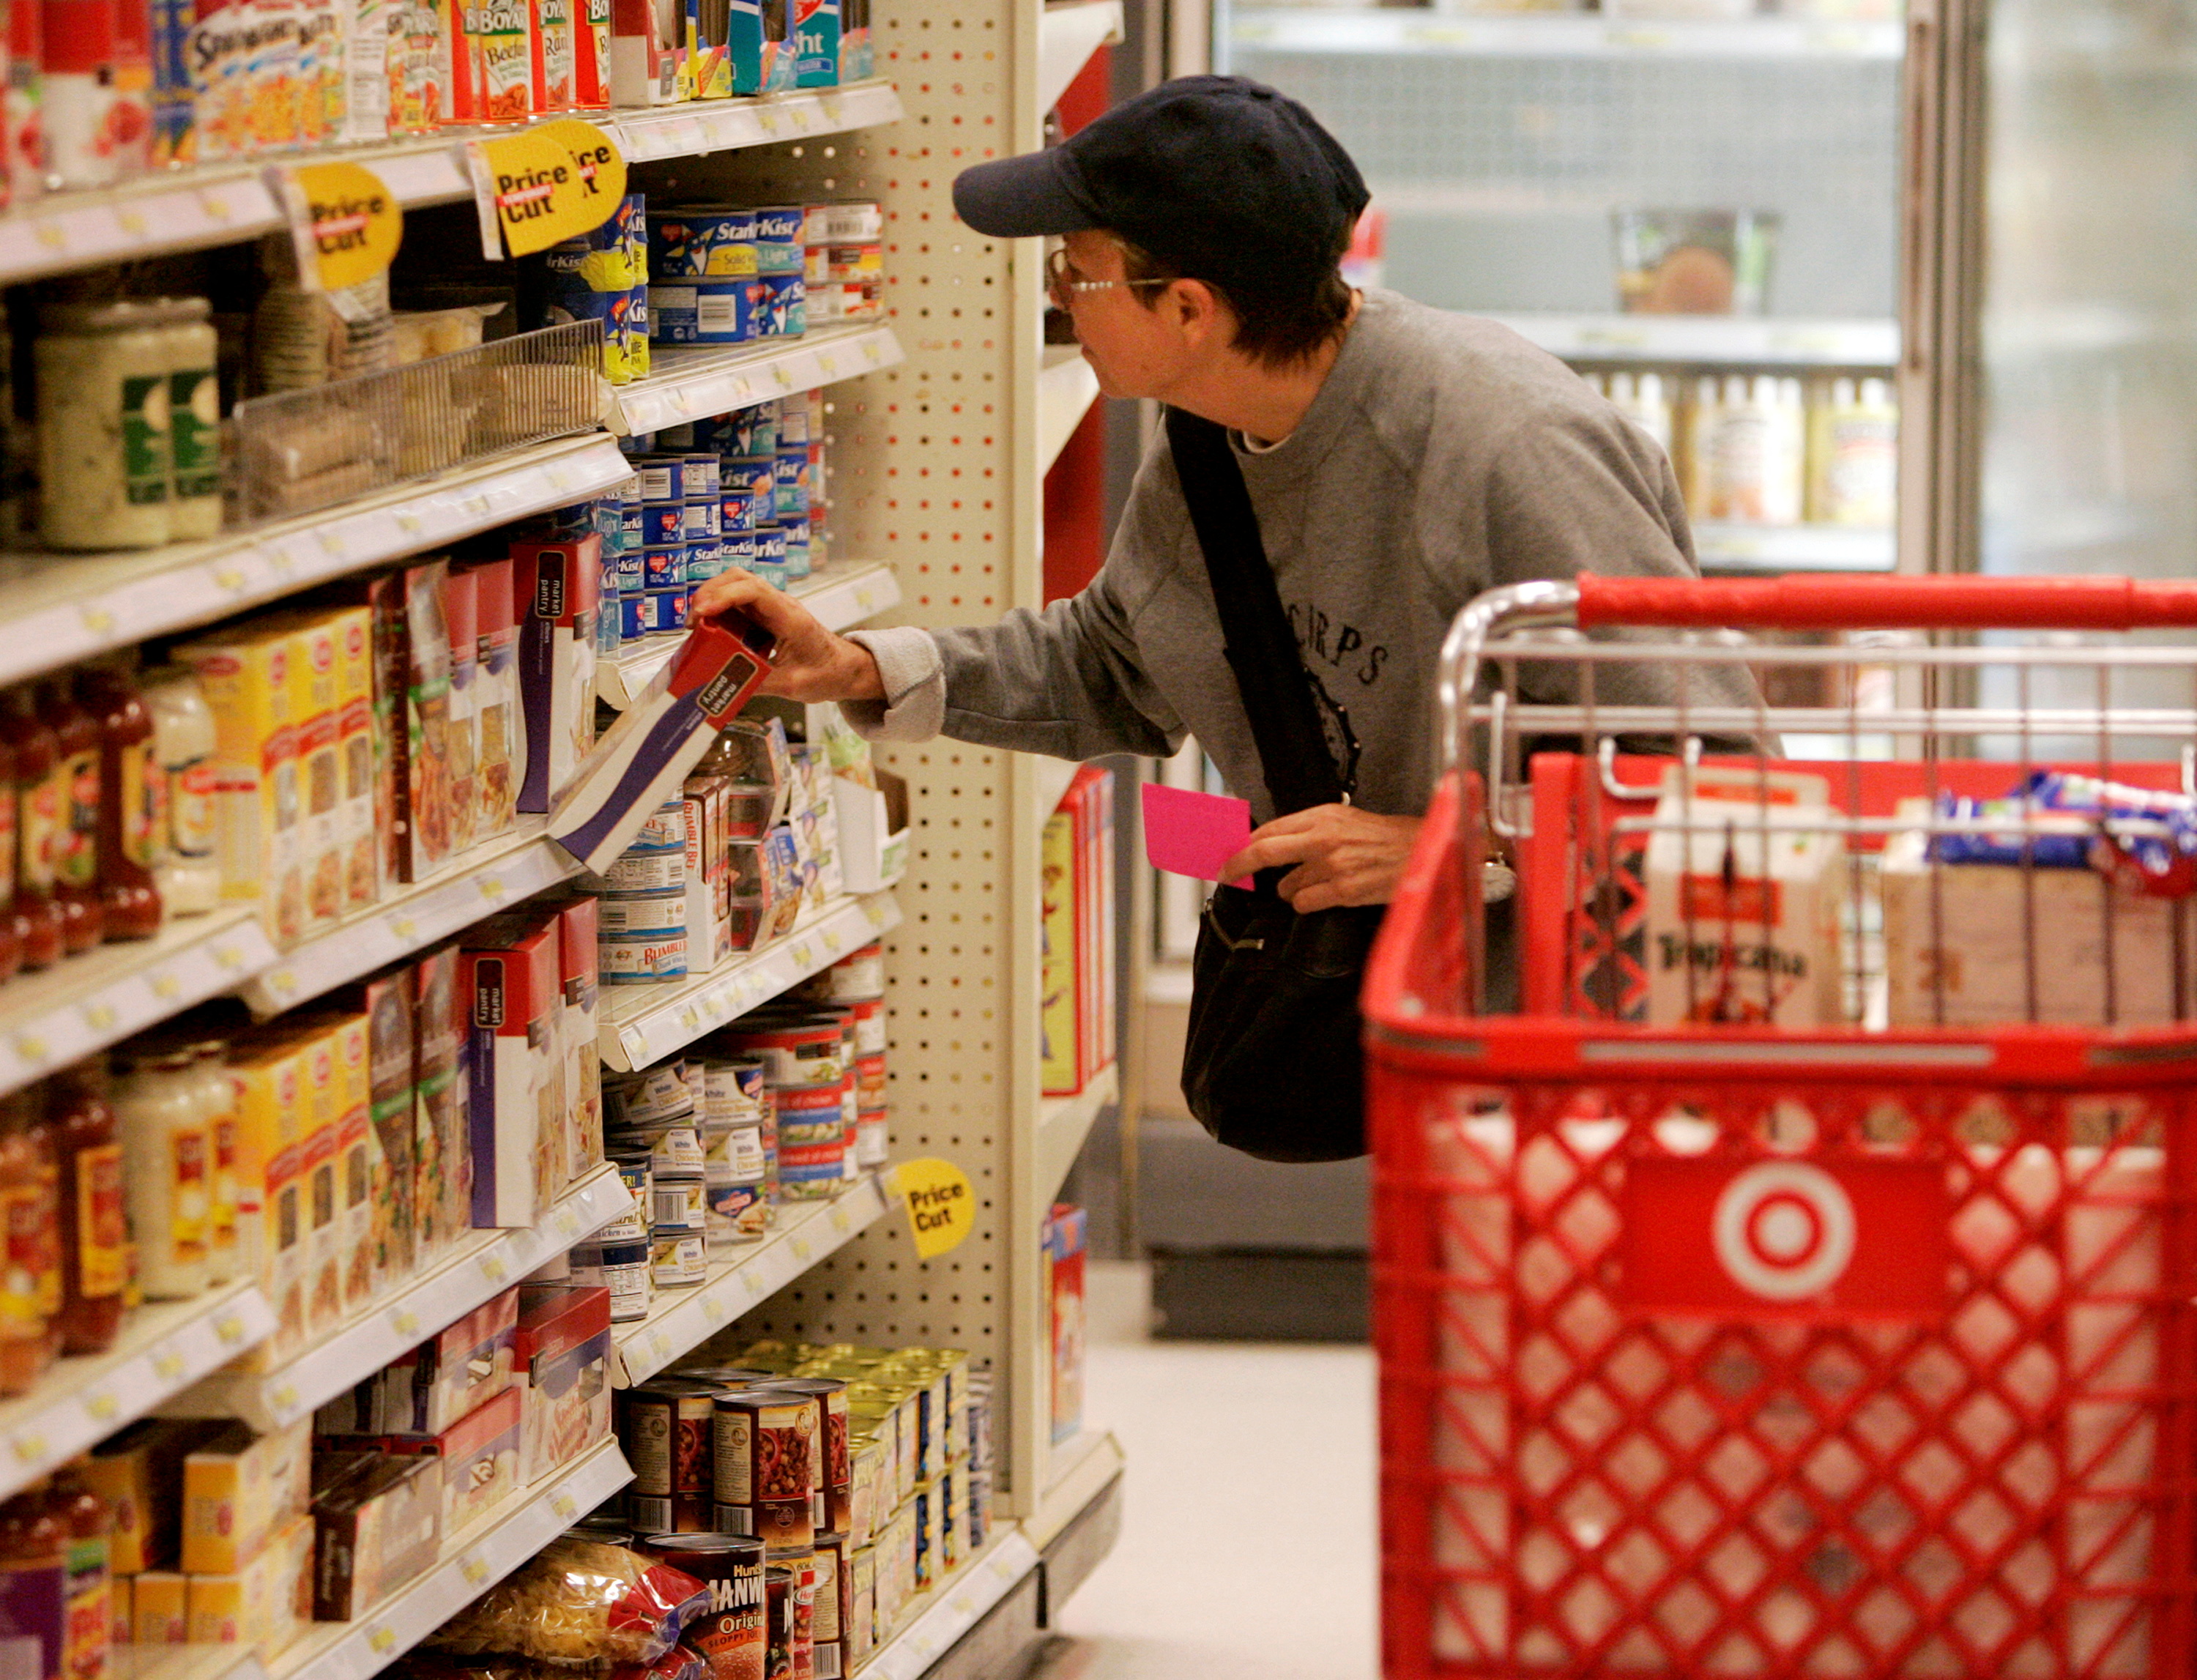 A shopper looks at grocery items at a Target store in Los Angeles, California August 18, 2009.